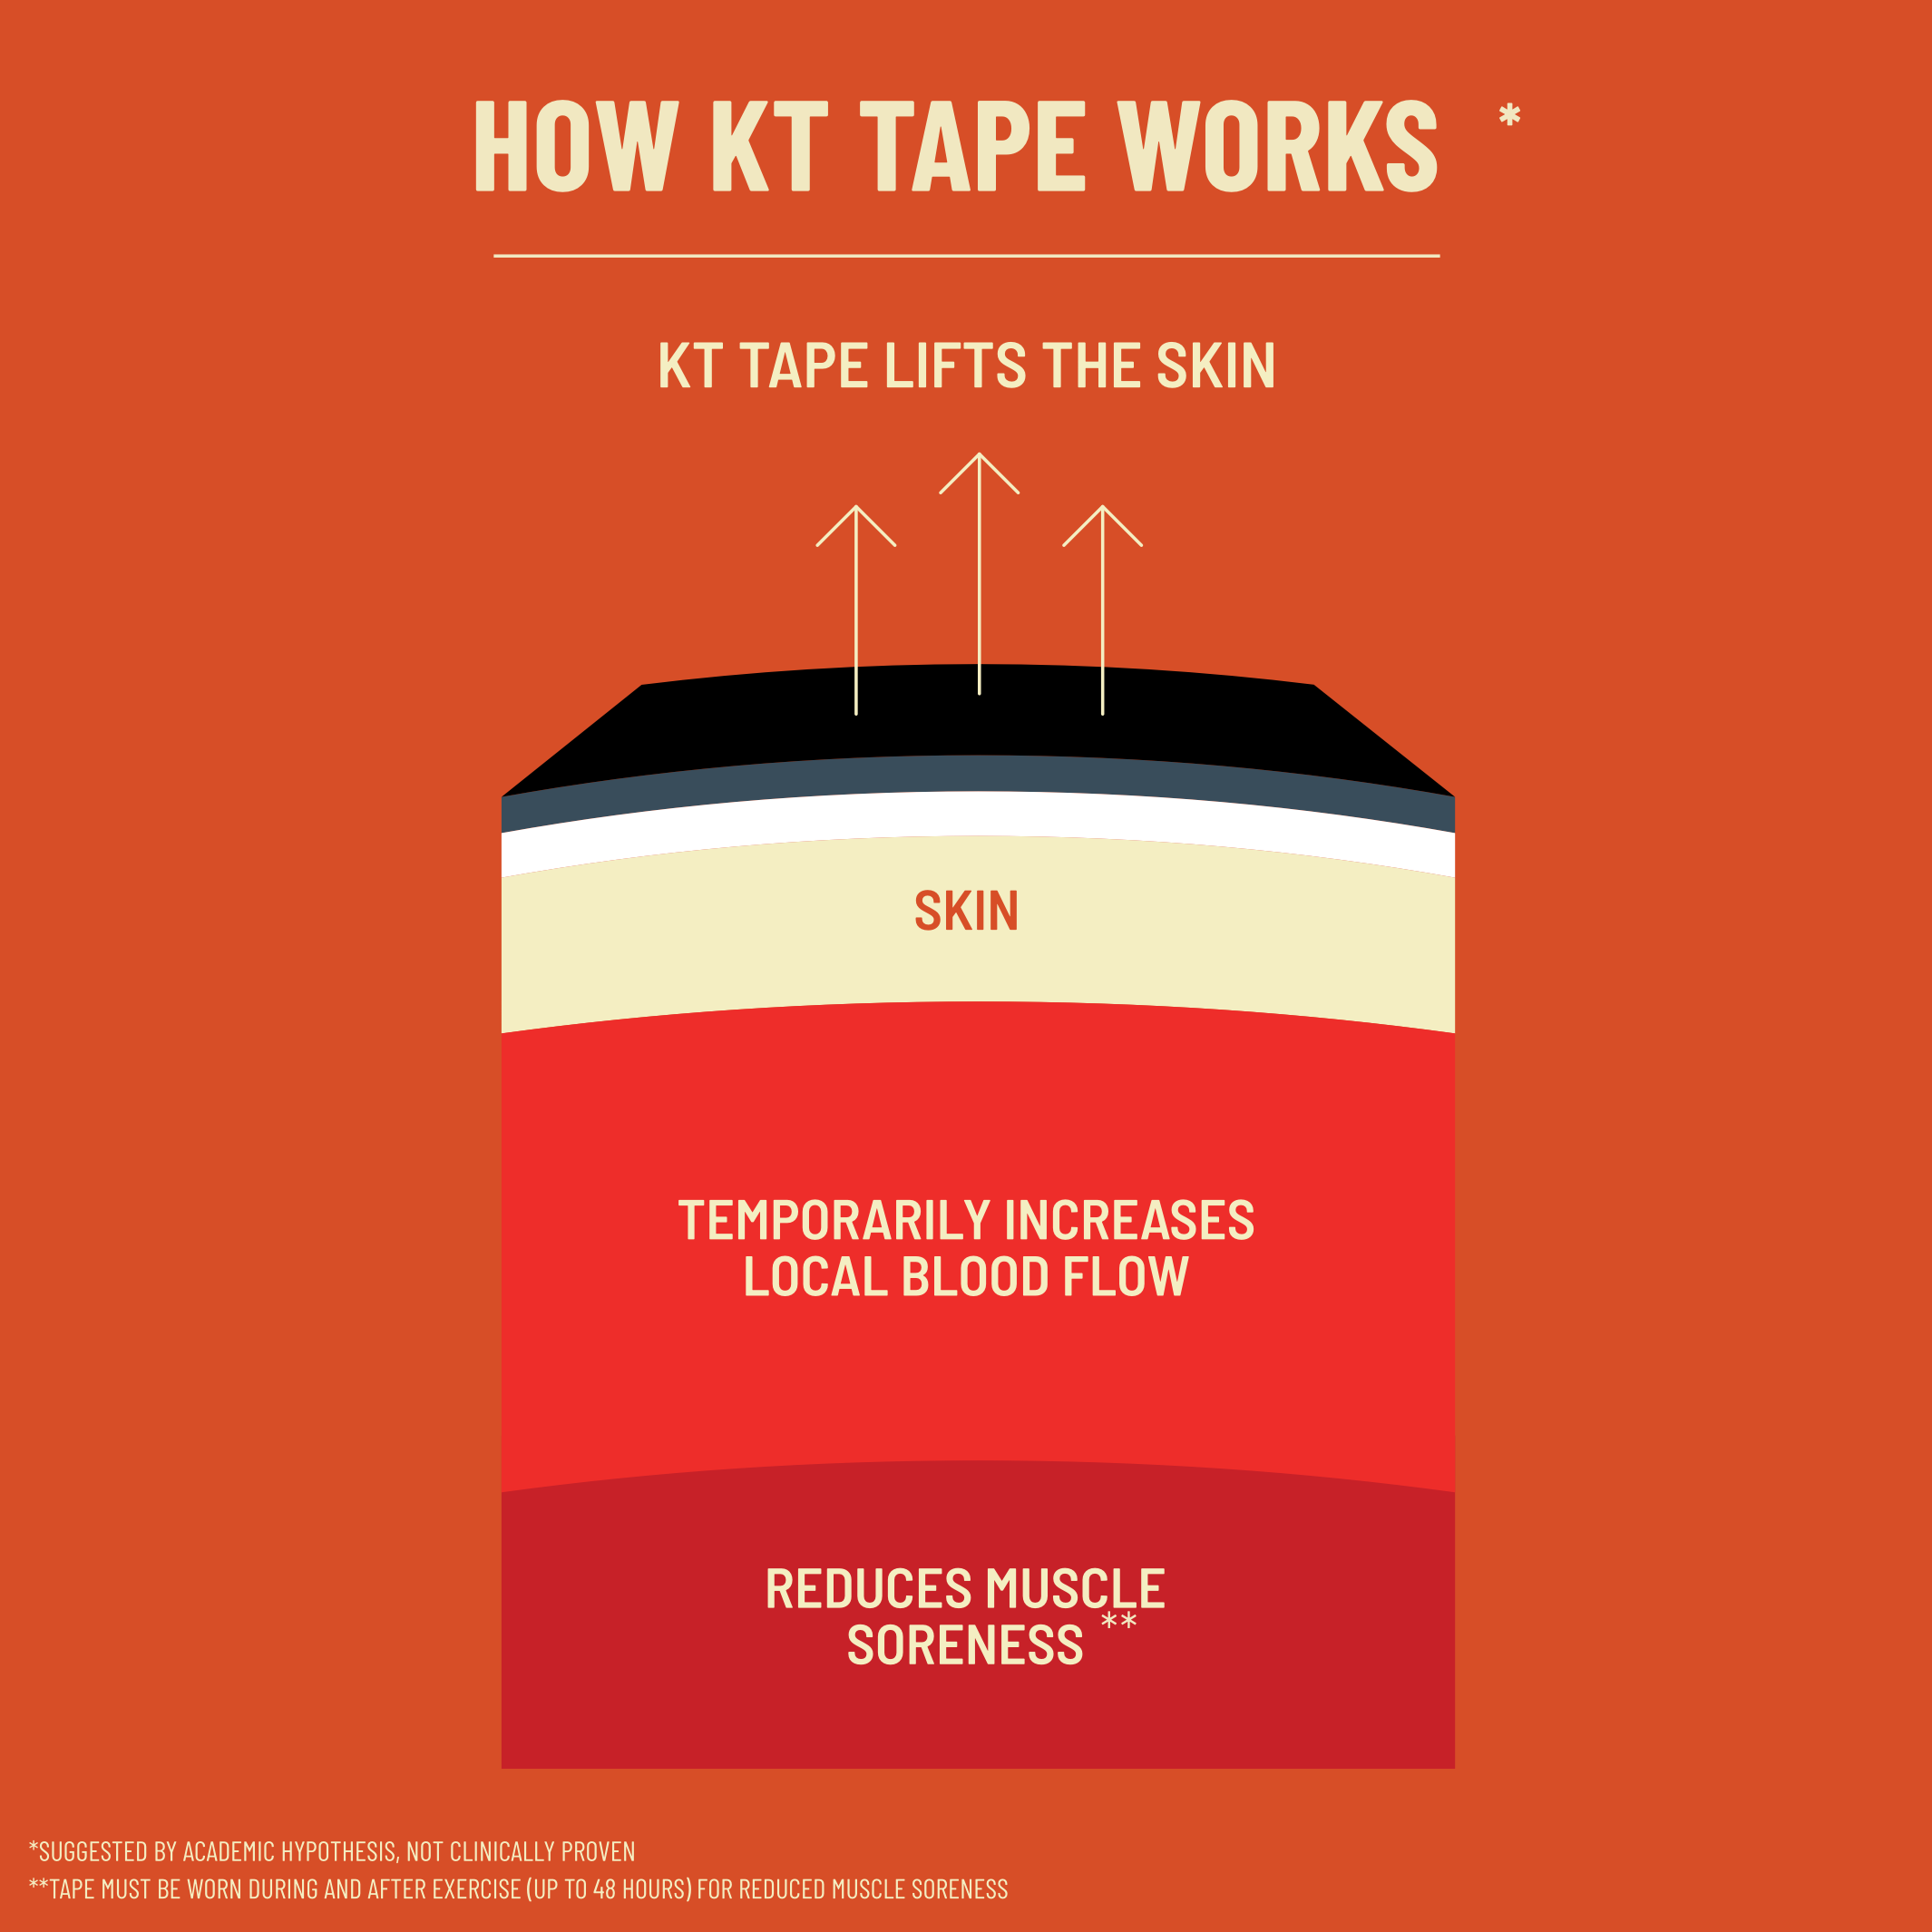 How KT Tape Works